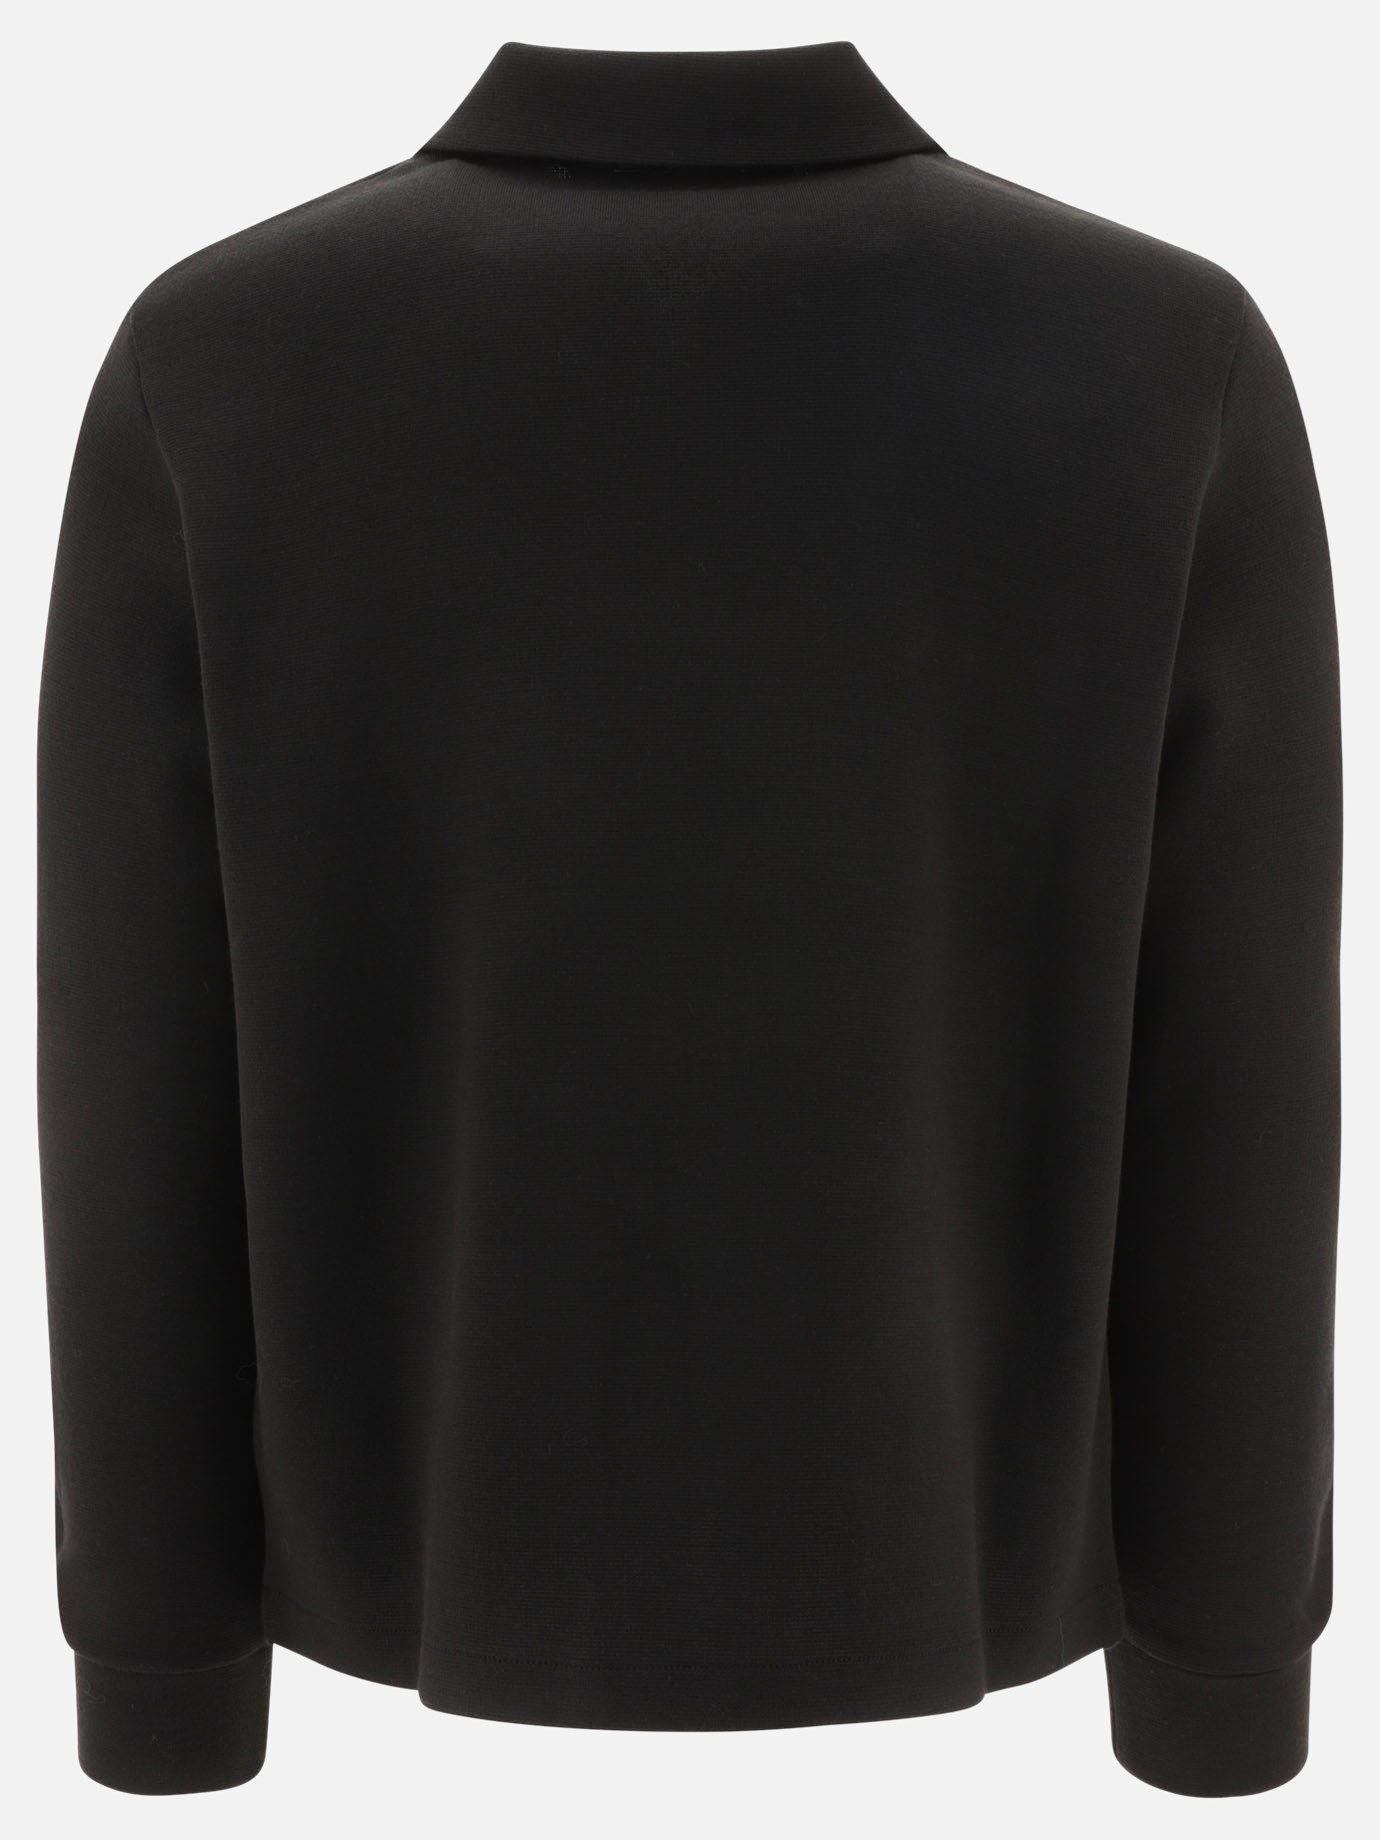 Maglione con zip  Shirt Collar  by Palm Angels